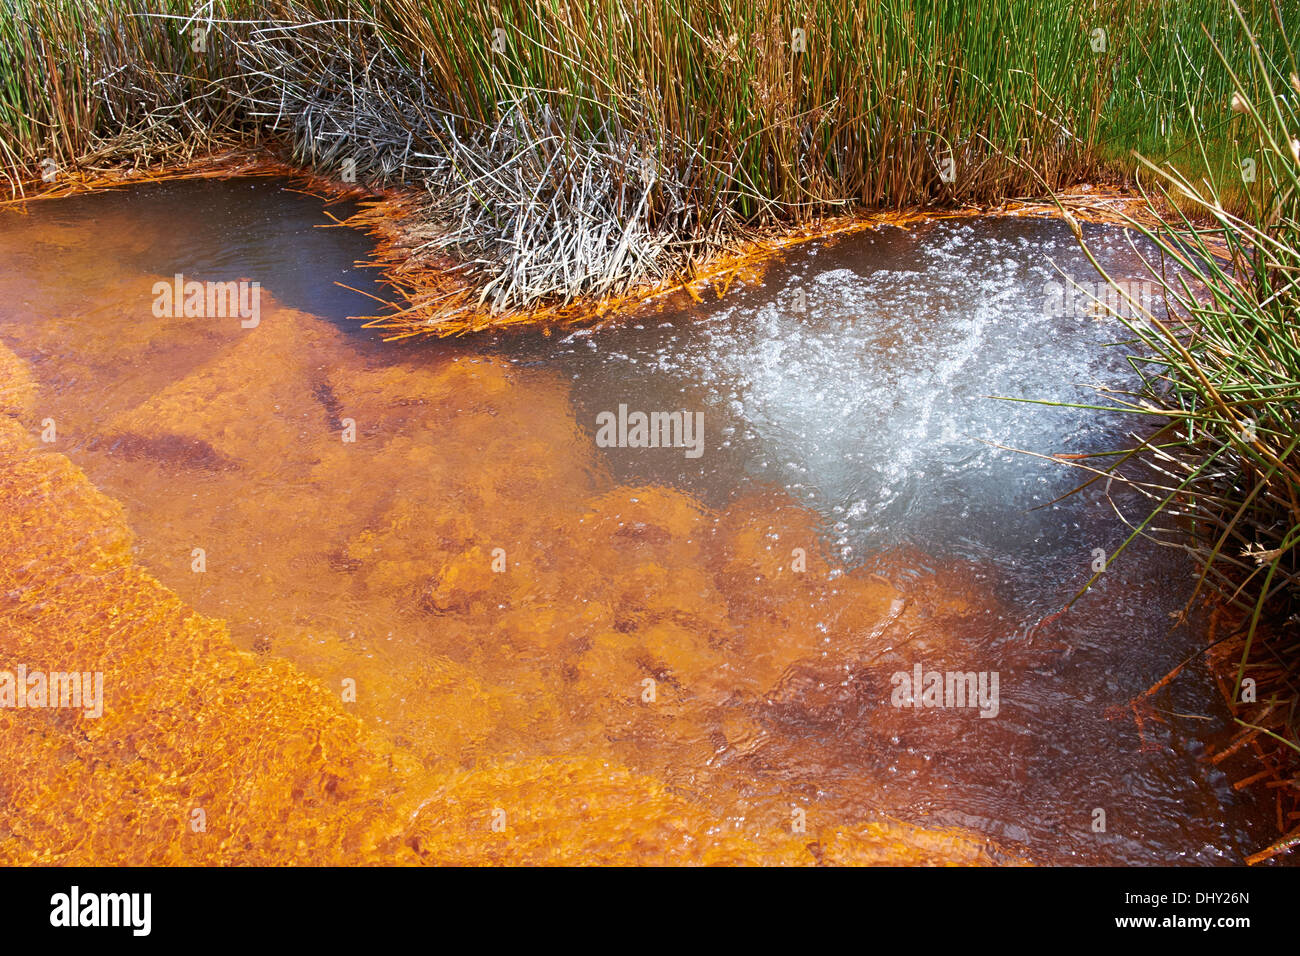 Hot Springs in the Rio Pumapampa valley high up in the Peruvian Andes, South America. Stock Photo